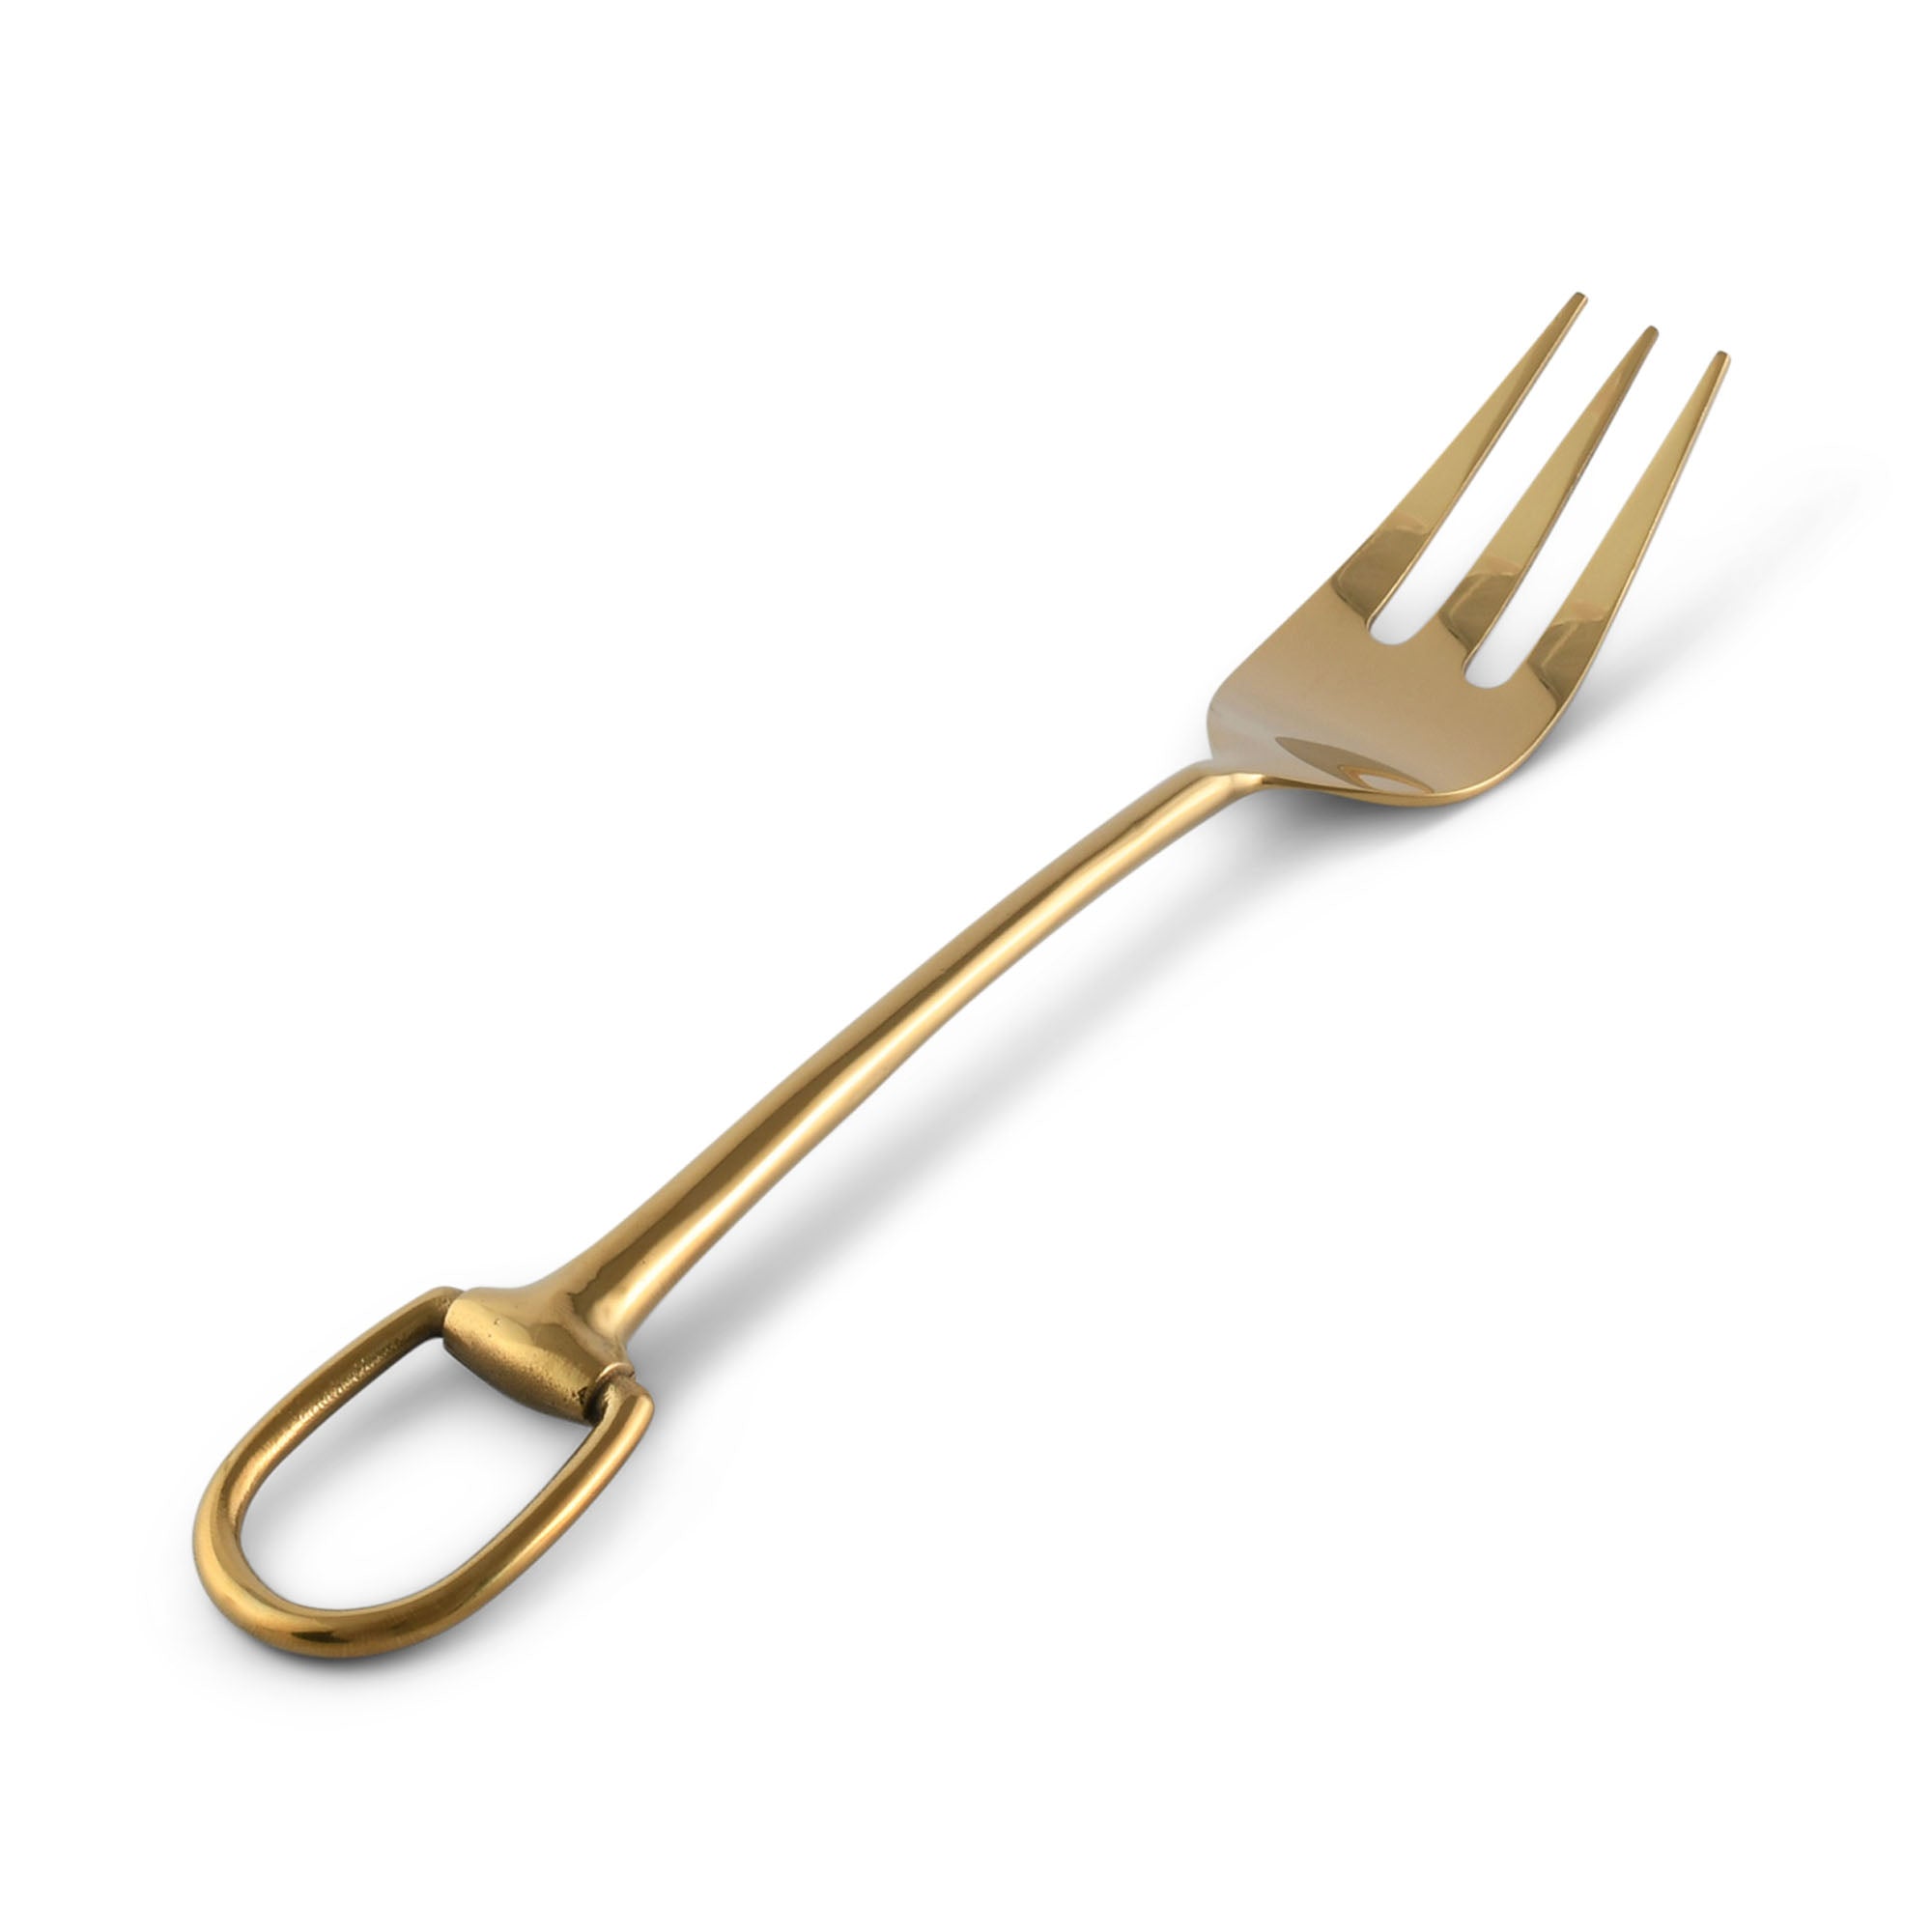 Vagabond House Stirrup Serving Fork - Stainless Steel Shiny Gold Product Image